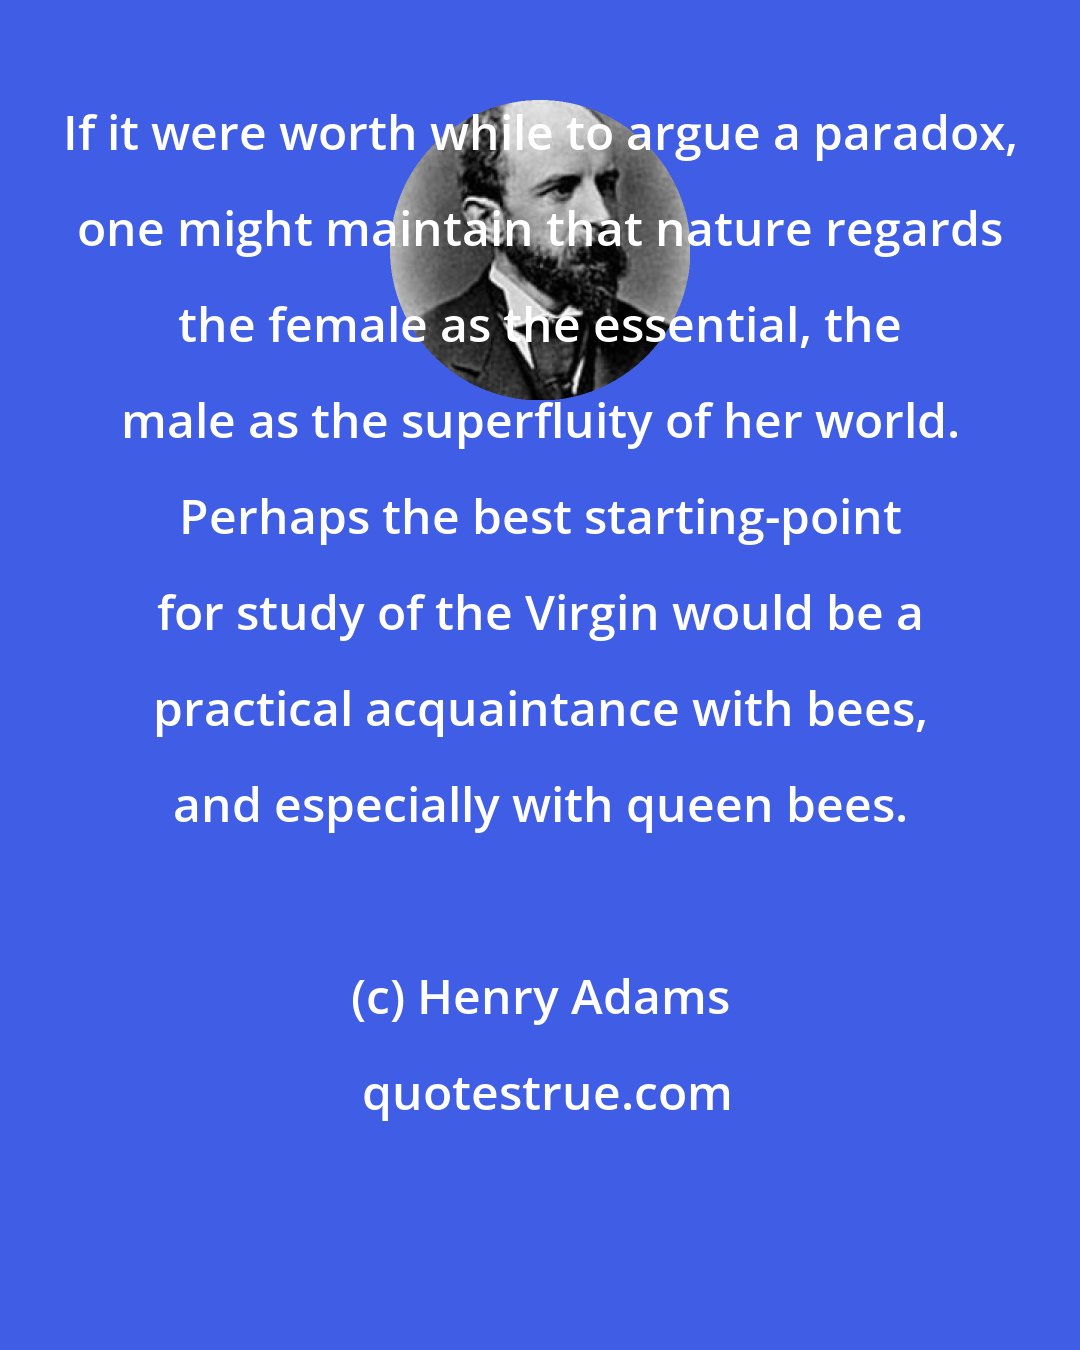 Henry Adams: If it were worth while to argue a paradox, one might maintain that nature regards the female as the essential, the male as the superfluity of her world. Perhaps the best starting-point for study of the Virgin would be a practical acquaintance with bees, and especially with queen bees.